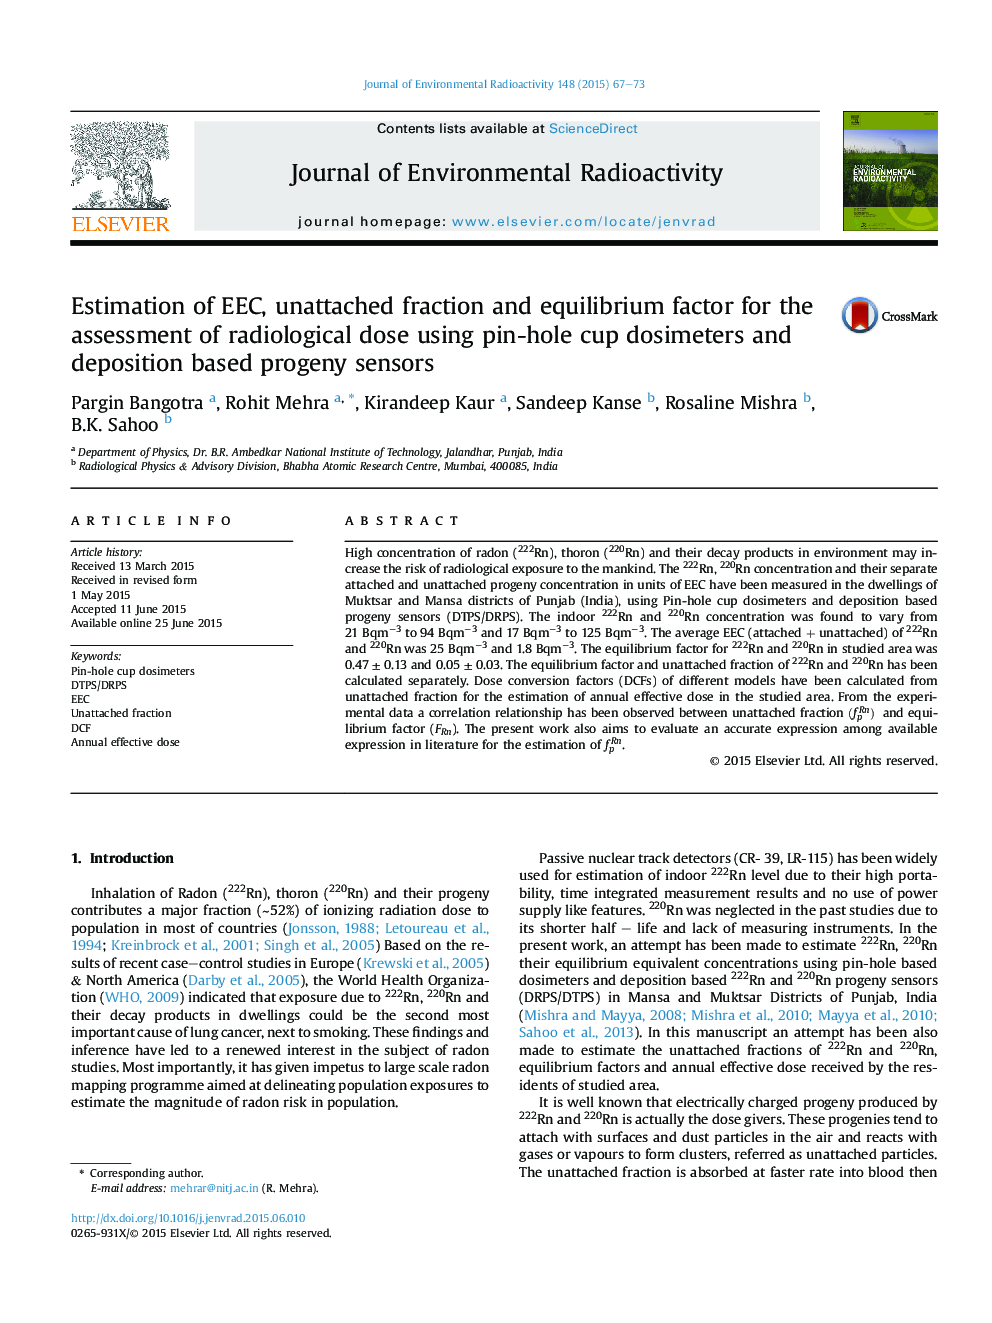 Estimation of EEC, unattached fraction and equilibrium factor for the assessment of radiological dose using pin-hole cup dosimeters and deposition based progeny sensors